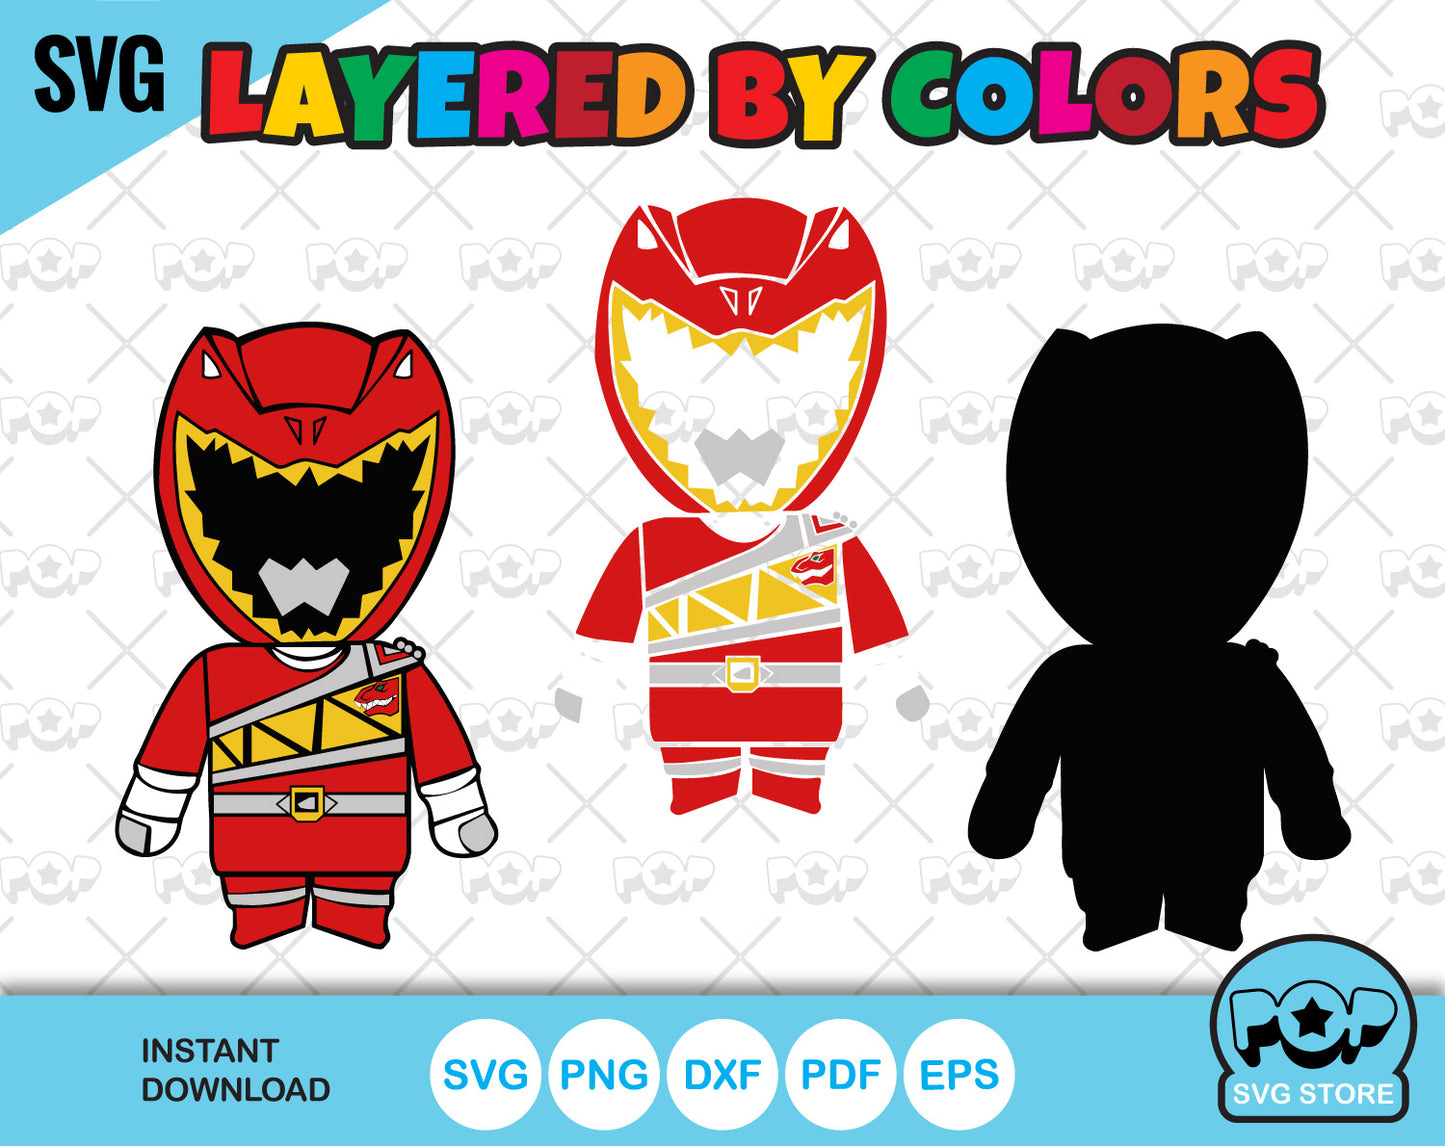 Chibi Power Rangers clipart - Samurai + Dino Charge Set, SVG cut files for Cricut / Silhouette, PNG, DXF, instant download